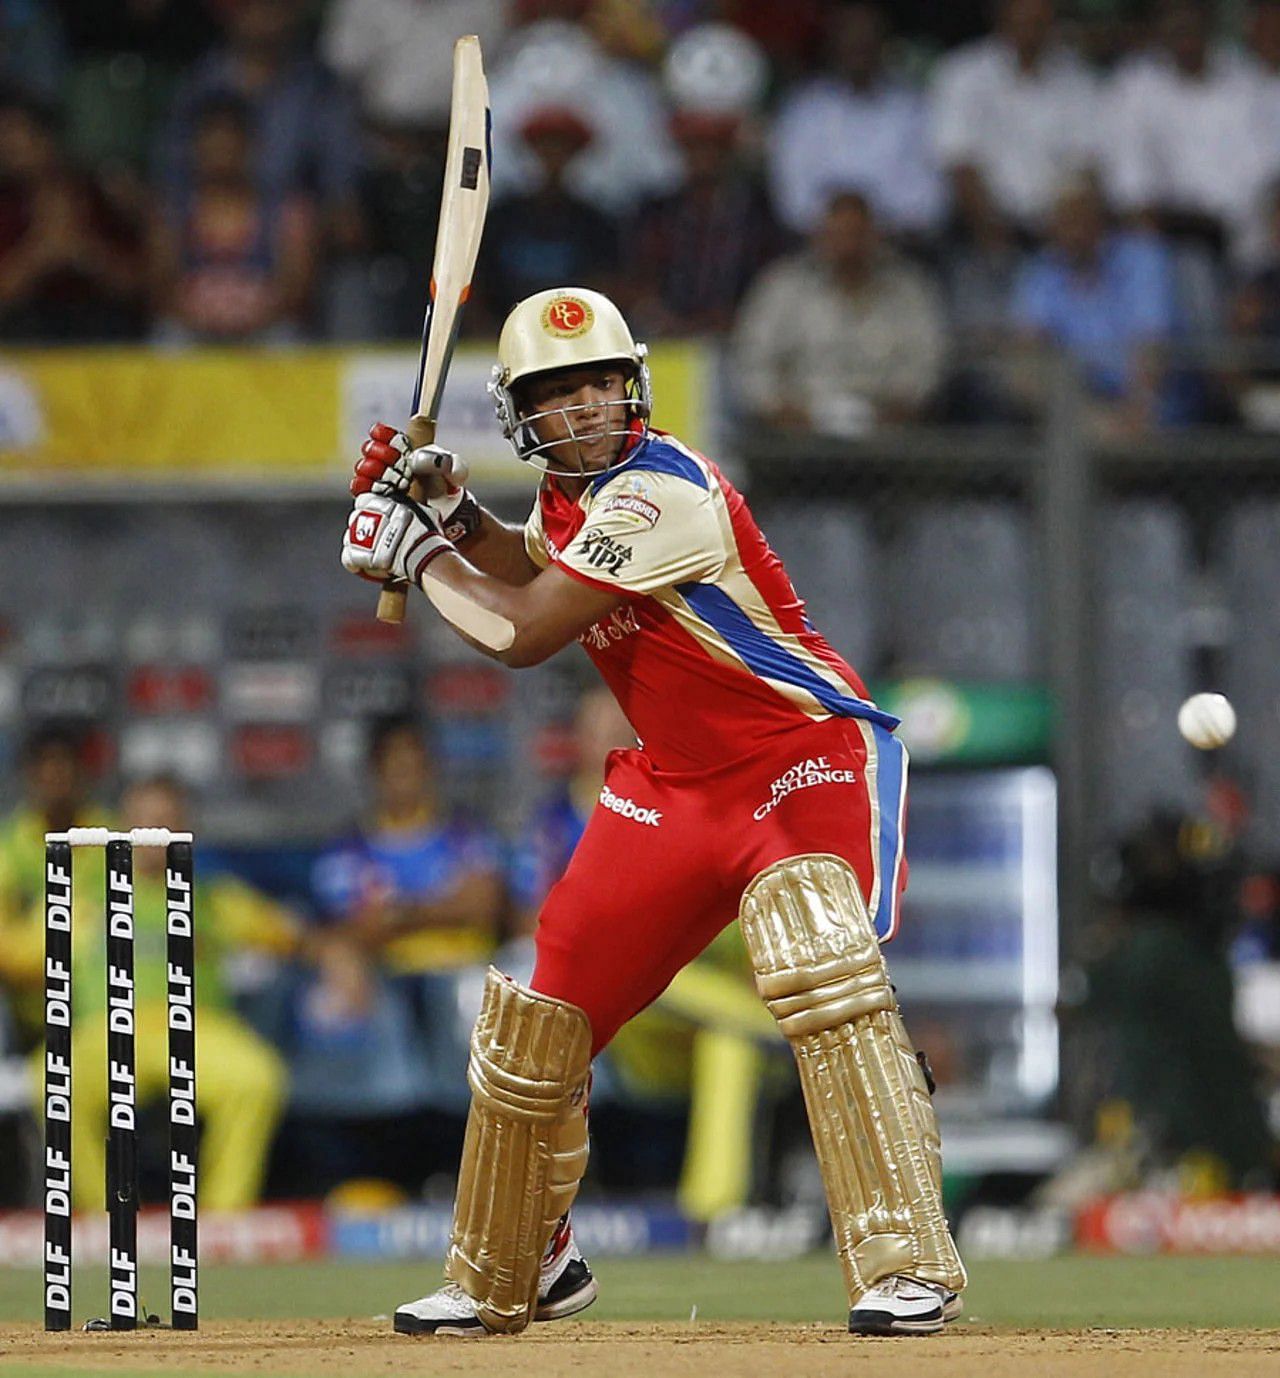 Mayank Agarwal in action for RCB against CSK [IPLT20]